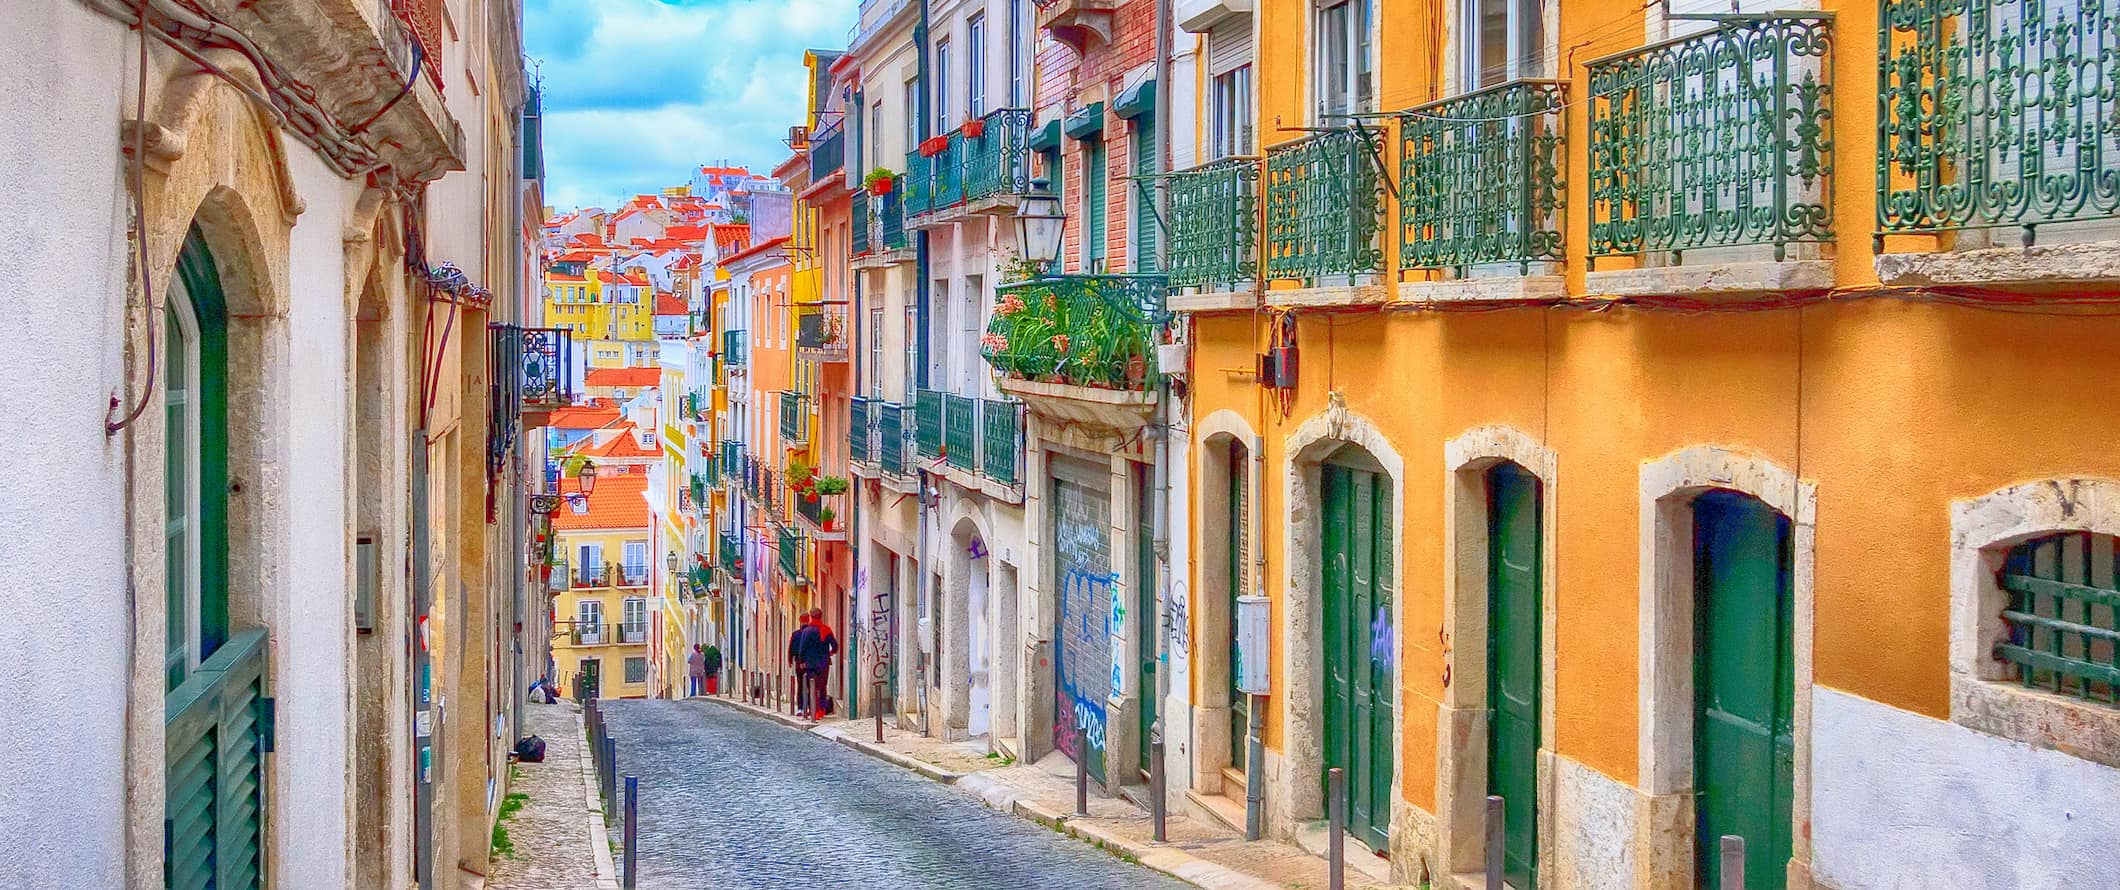 Locals walking down a narrow, colorful street in Lisbon, Portugal